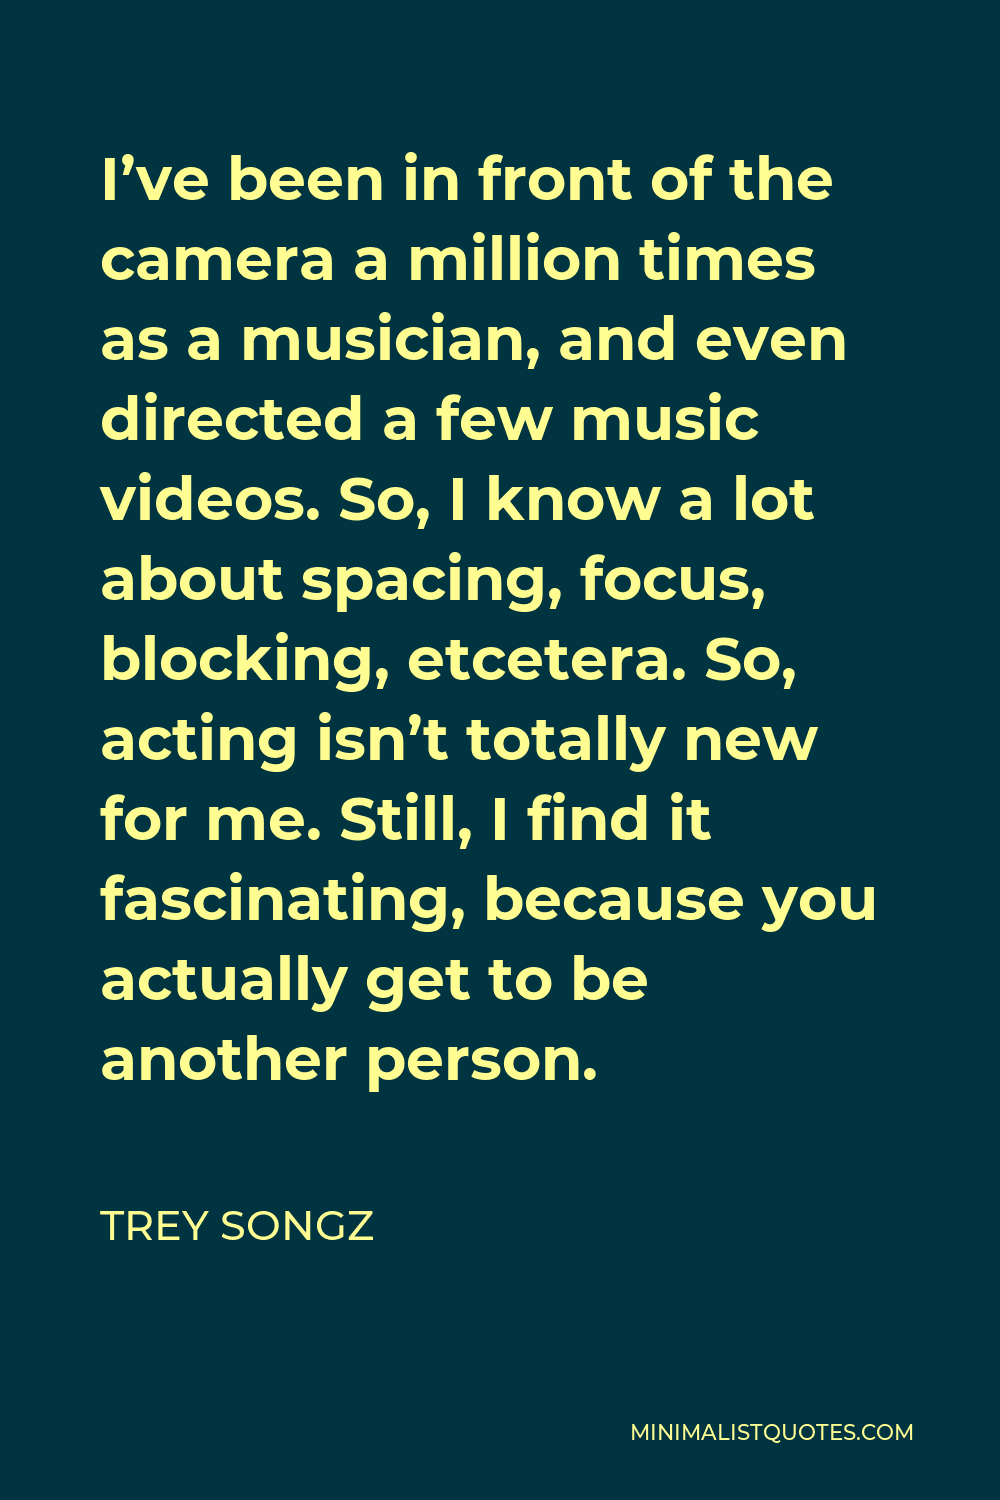 Trey Songz Quote - I’ve been in front of the camera a million times as a musician, and even directed a few music videos. So, I know a lot about spacing, focus, blocking, etcetera. So, acting isn’t totally new for me. Still, I find it fascinating, because you actually get to be another person.